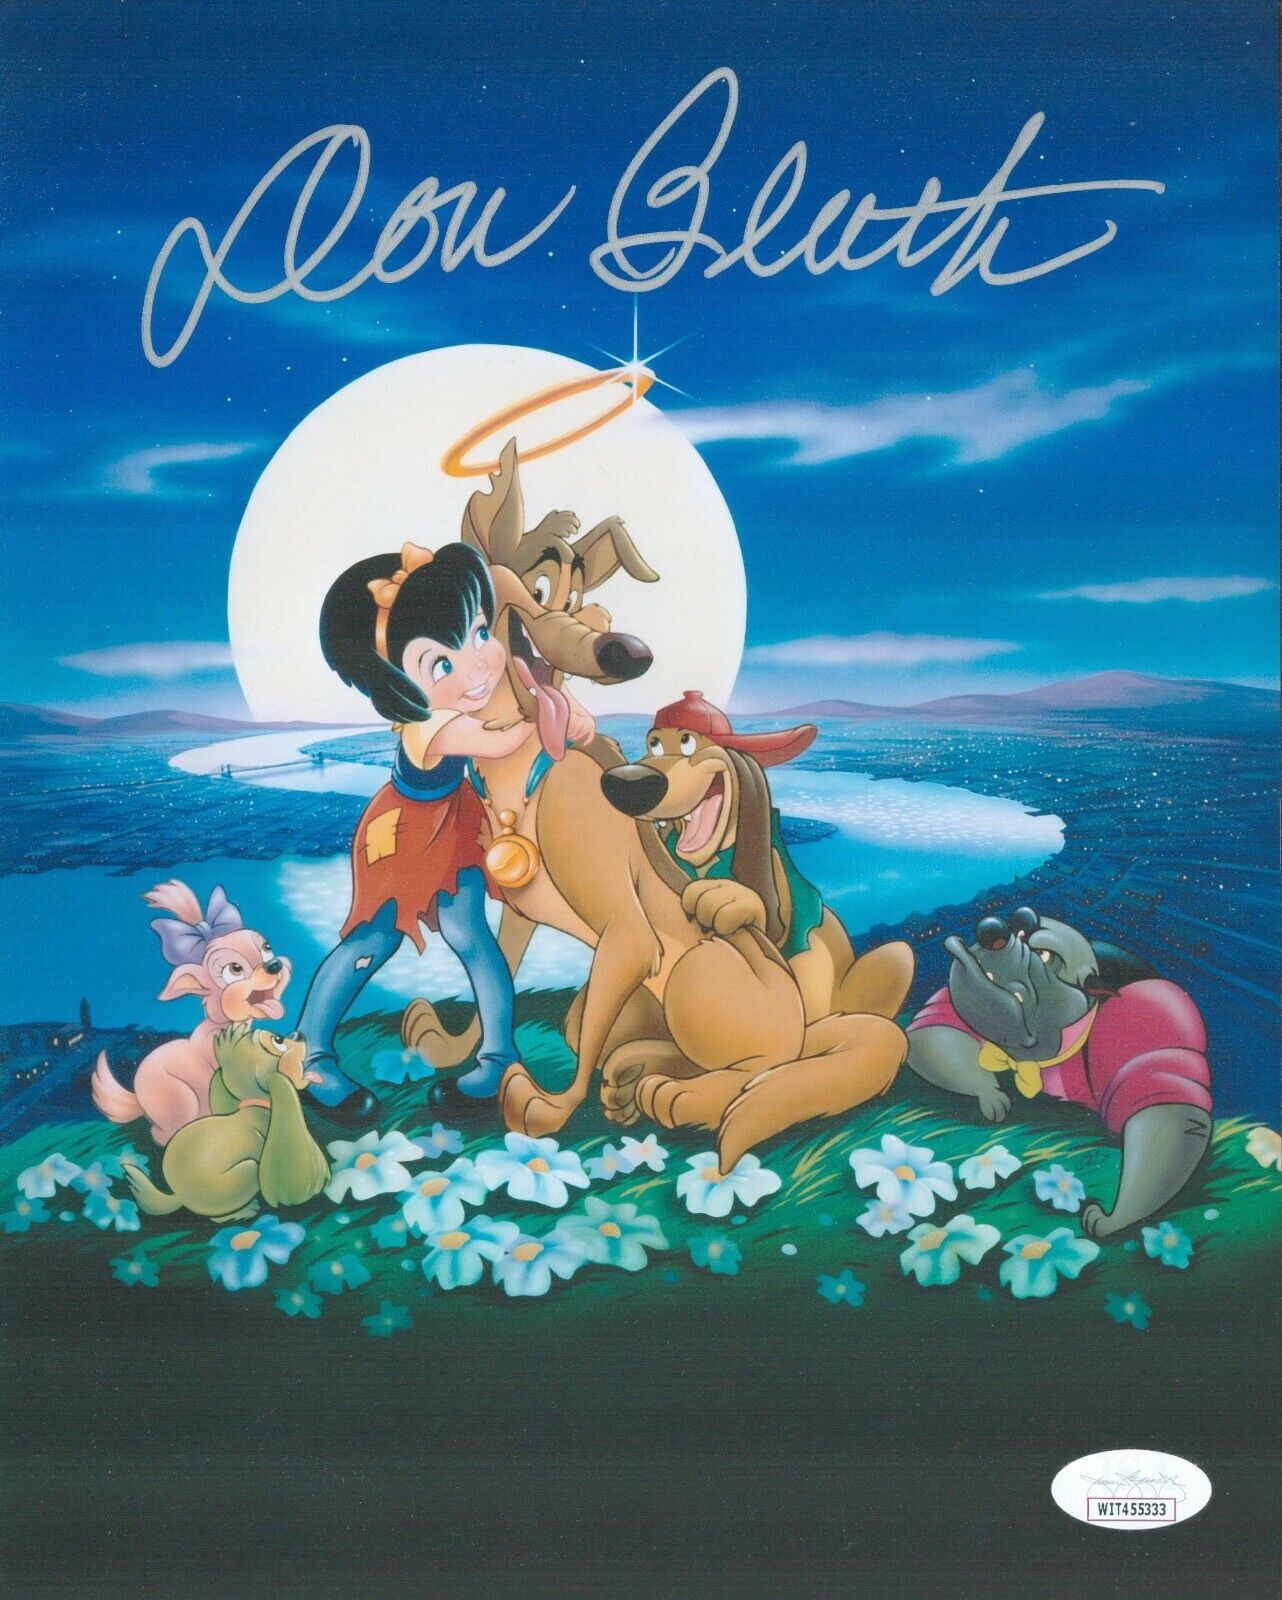 Don Bluth Hand Signed 8x10 All Dogs Go To Heaven Authentic Autograph JSA COA WIT